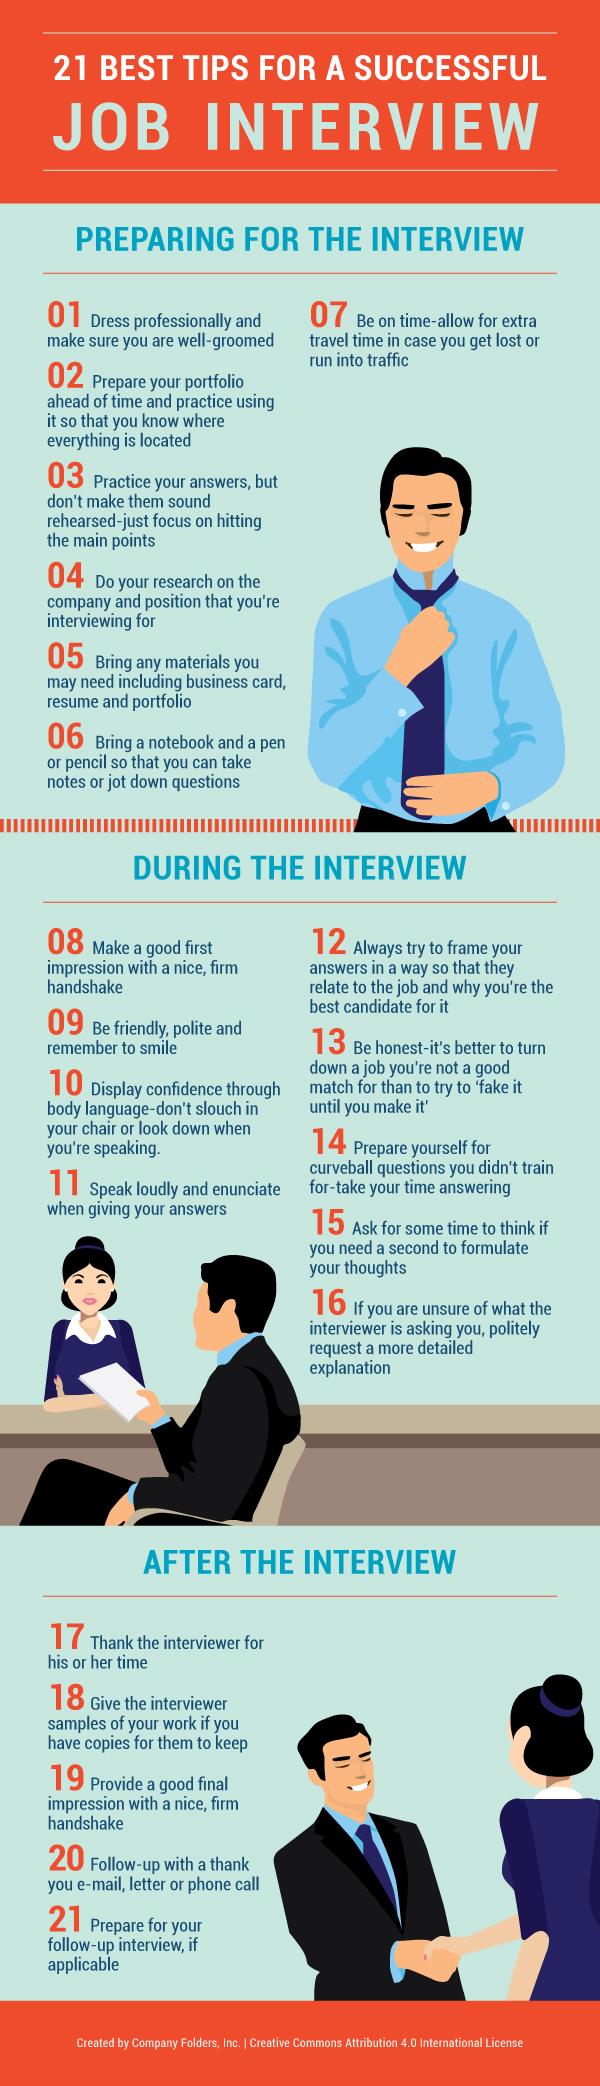 21 Tips For A Successful Job Interview [Infographic]